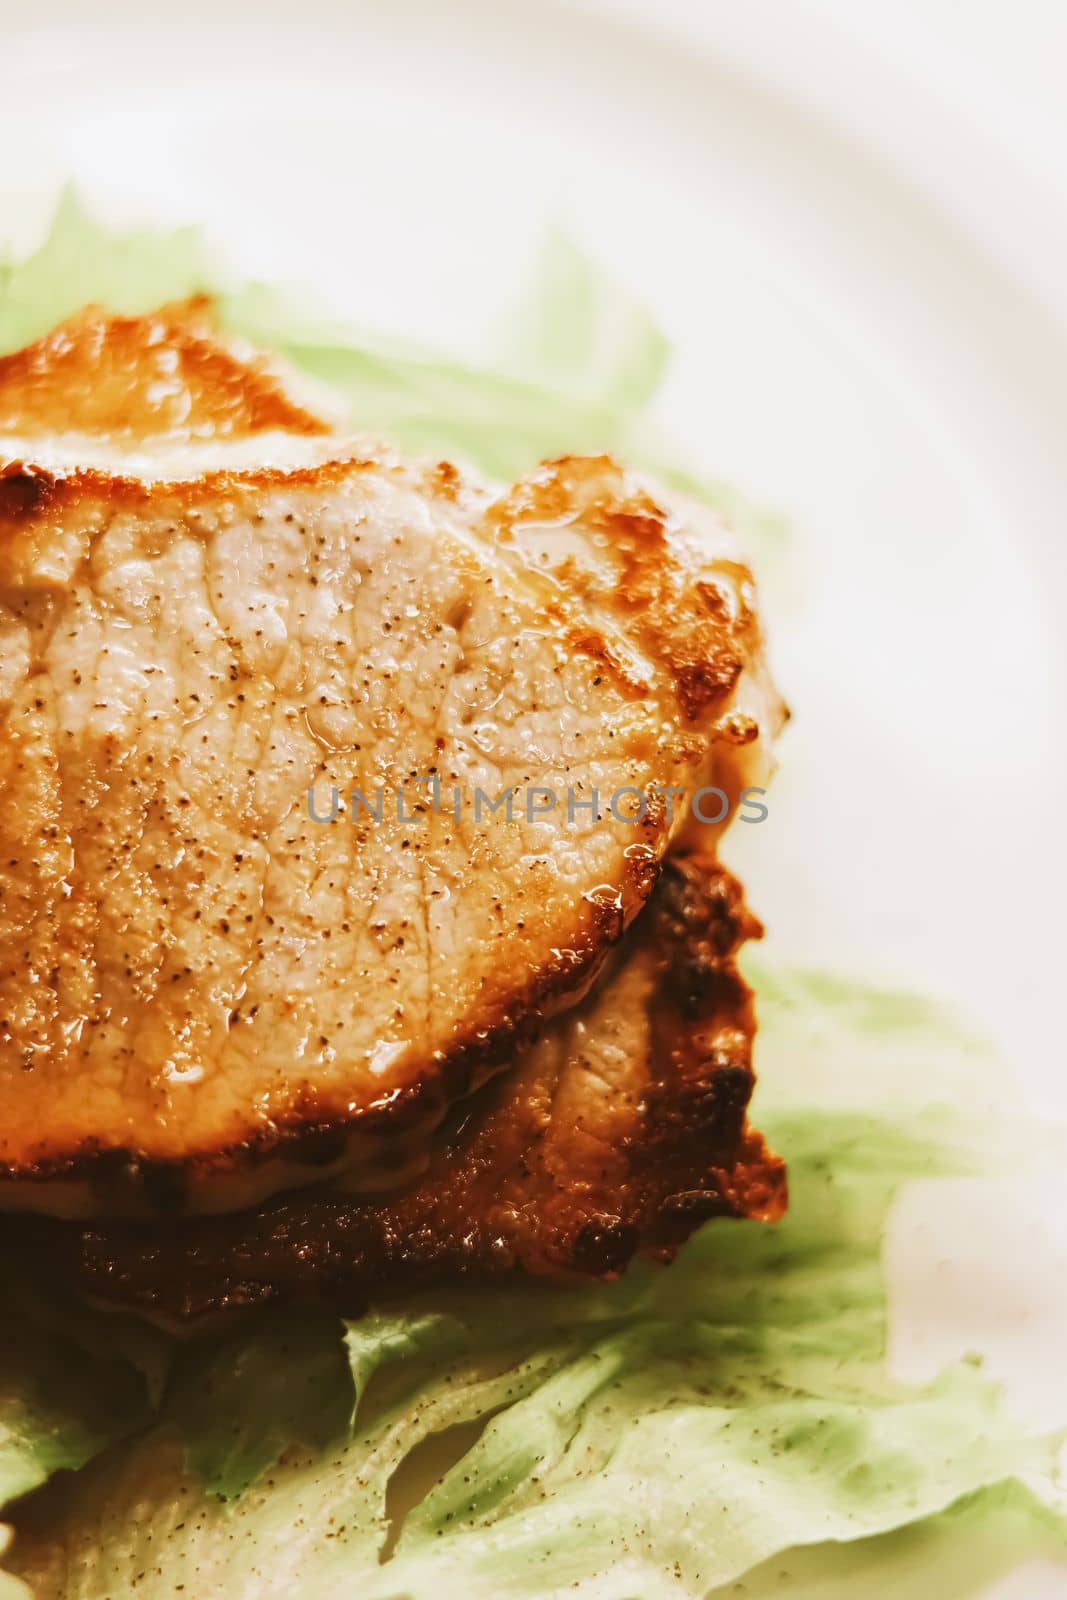 Food and diet, fried pork fillet with lettuce as meal for lunch or dinner, tasty recipe by Anneleven